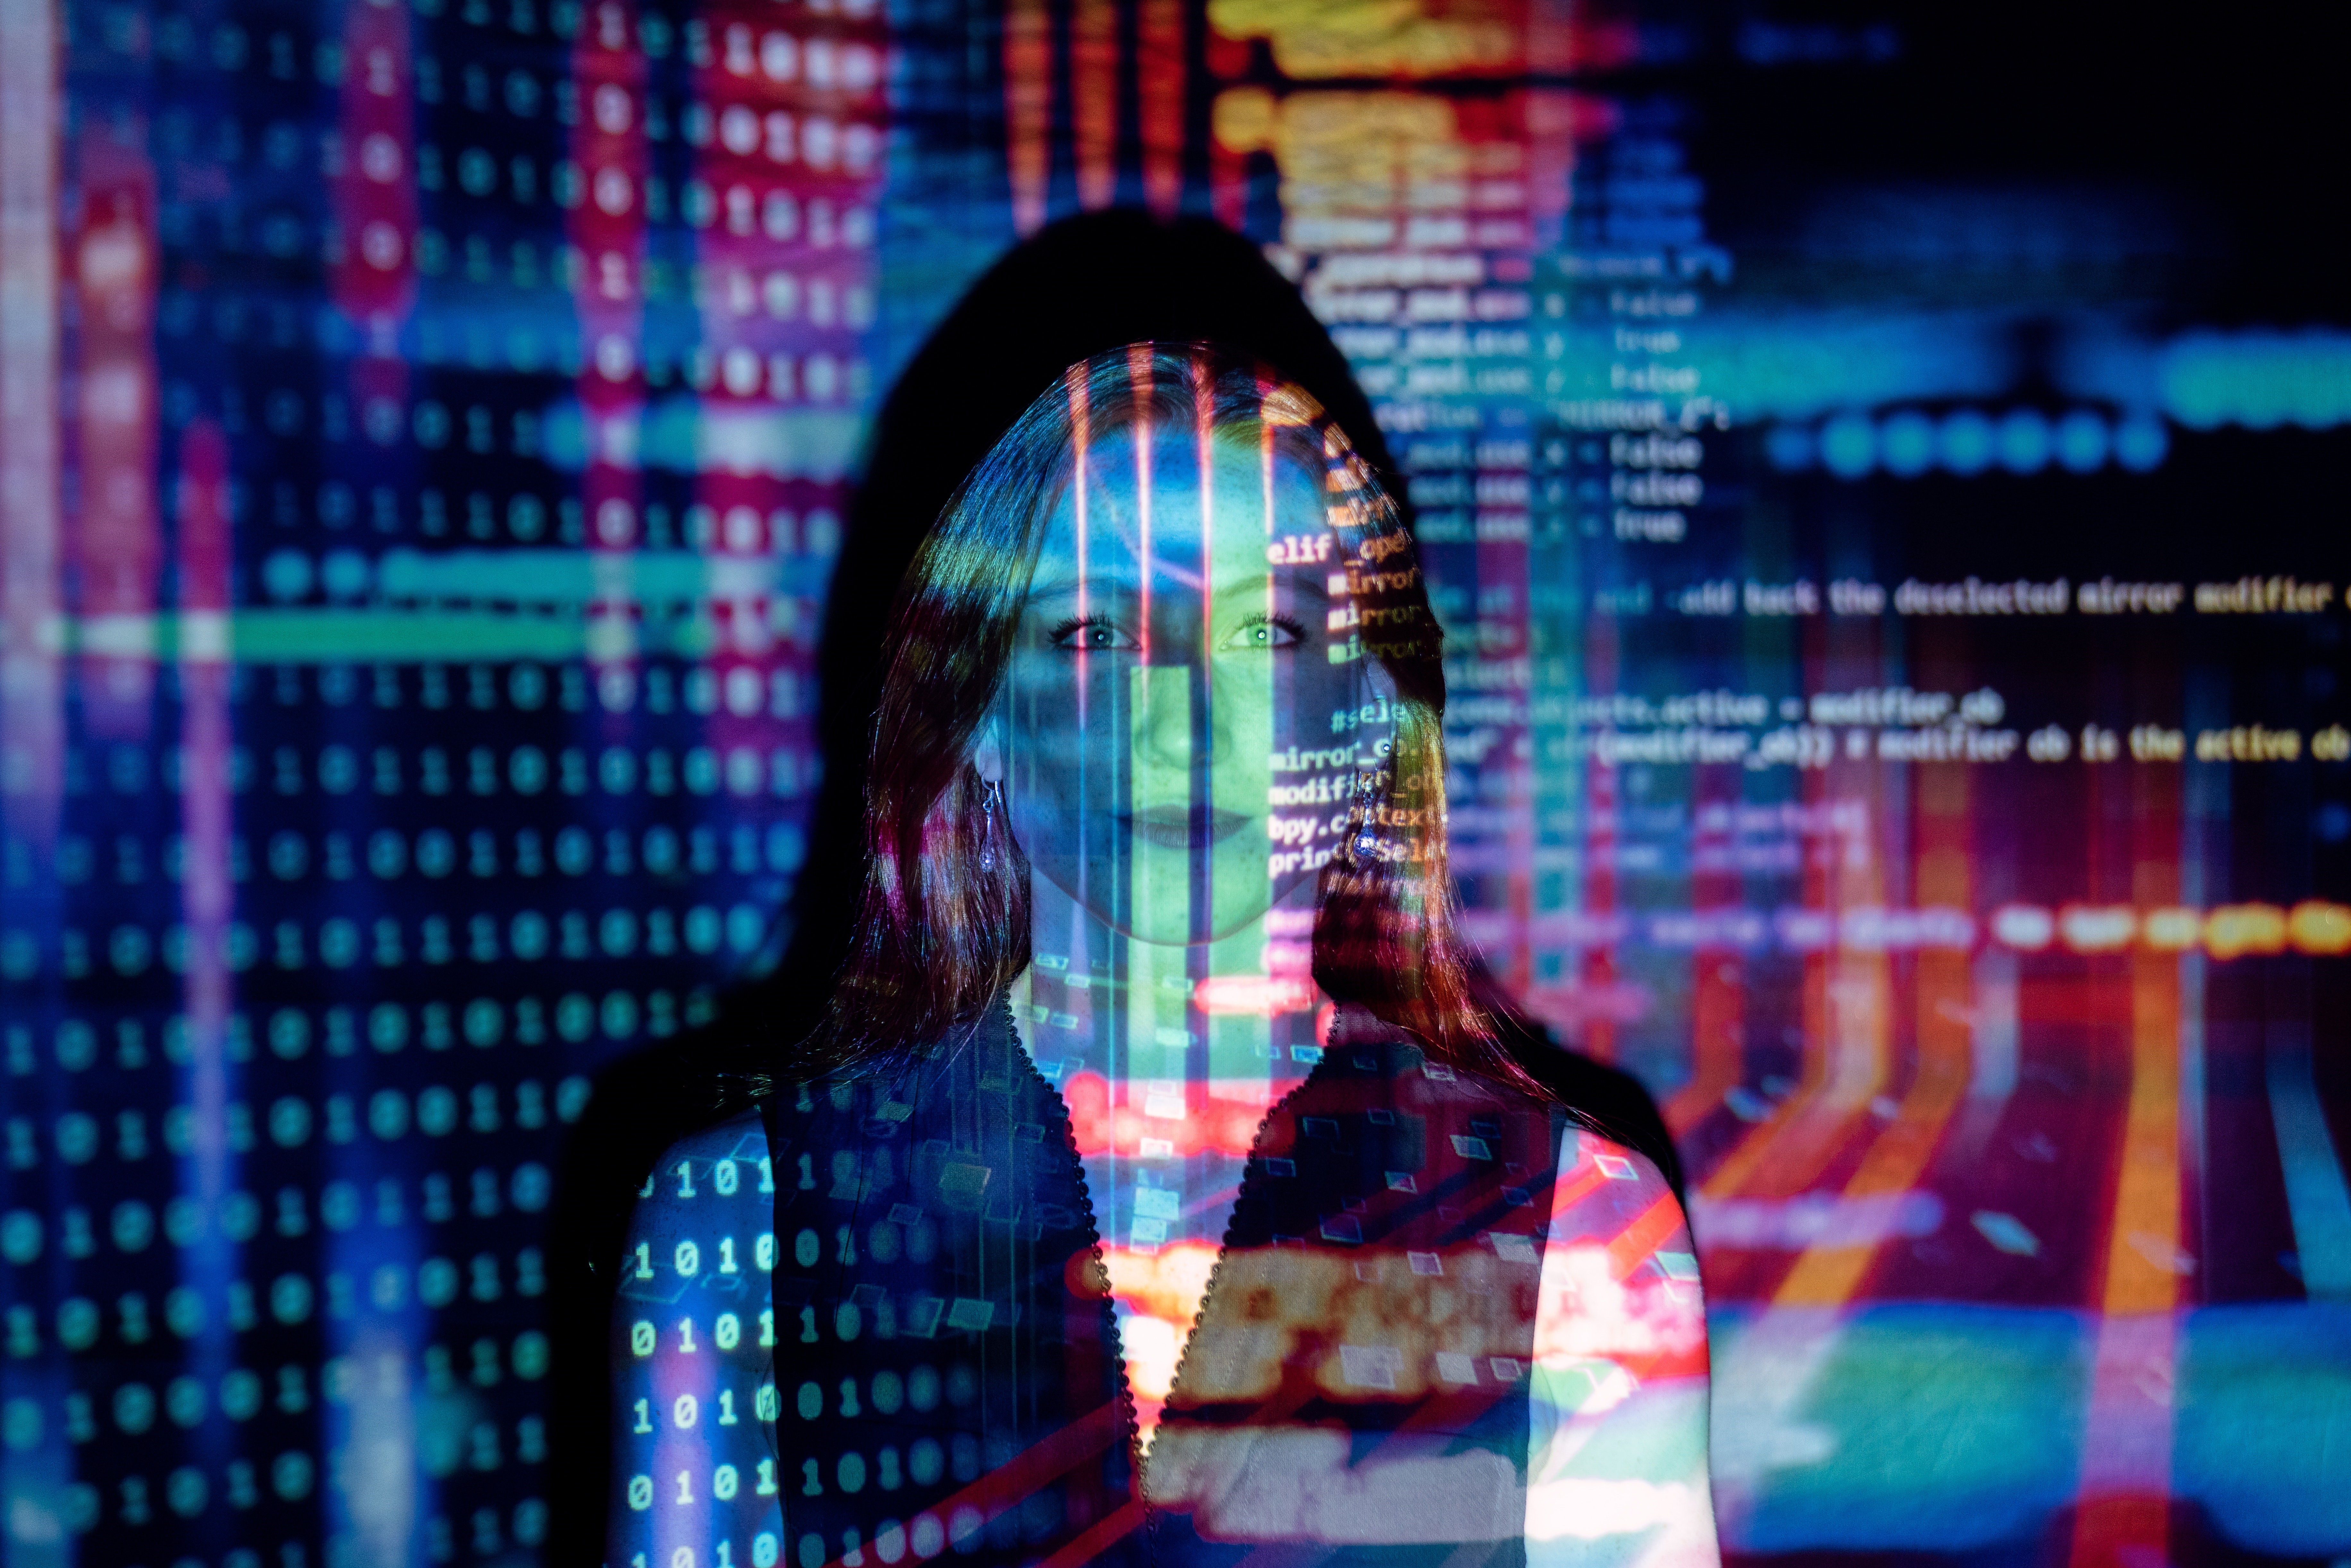 Image of a woman standing in front of a projection of what appears to be software code.